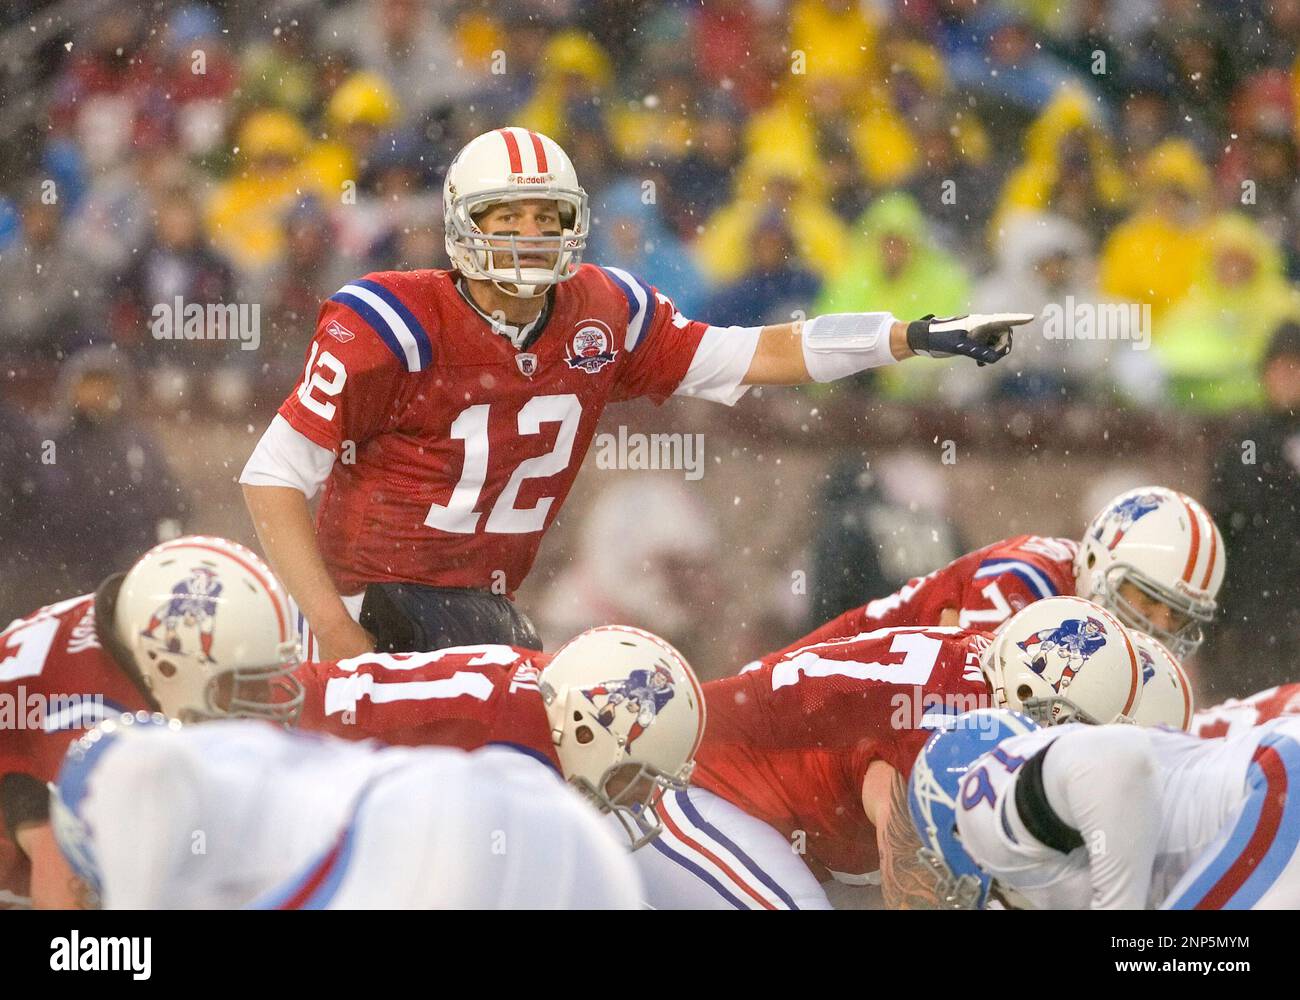 18 October 2009. Patriot Quarterback Tom Brady (12) in the first quarter of  a record setting game. The New England (Boston) Patriots defeated the  Tennessee (Oilers) Titans 59 to 0 in a